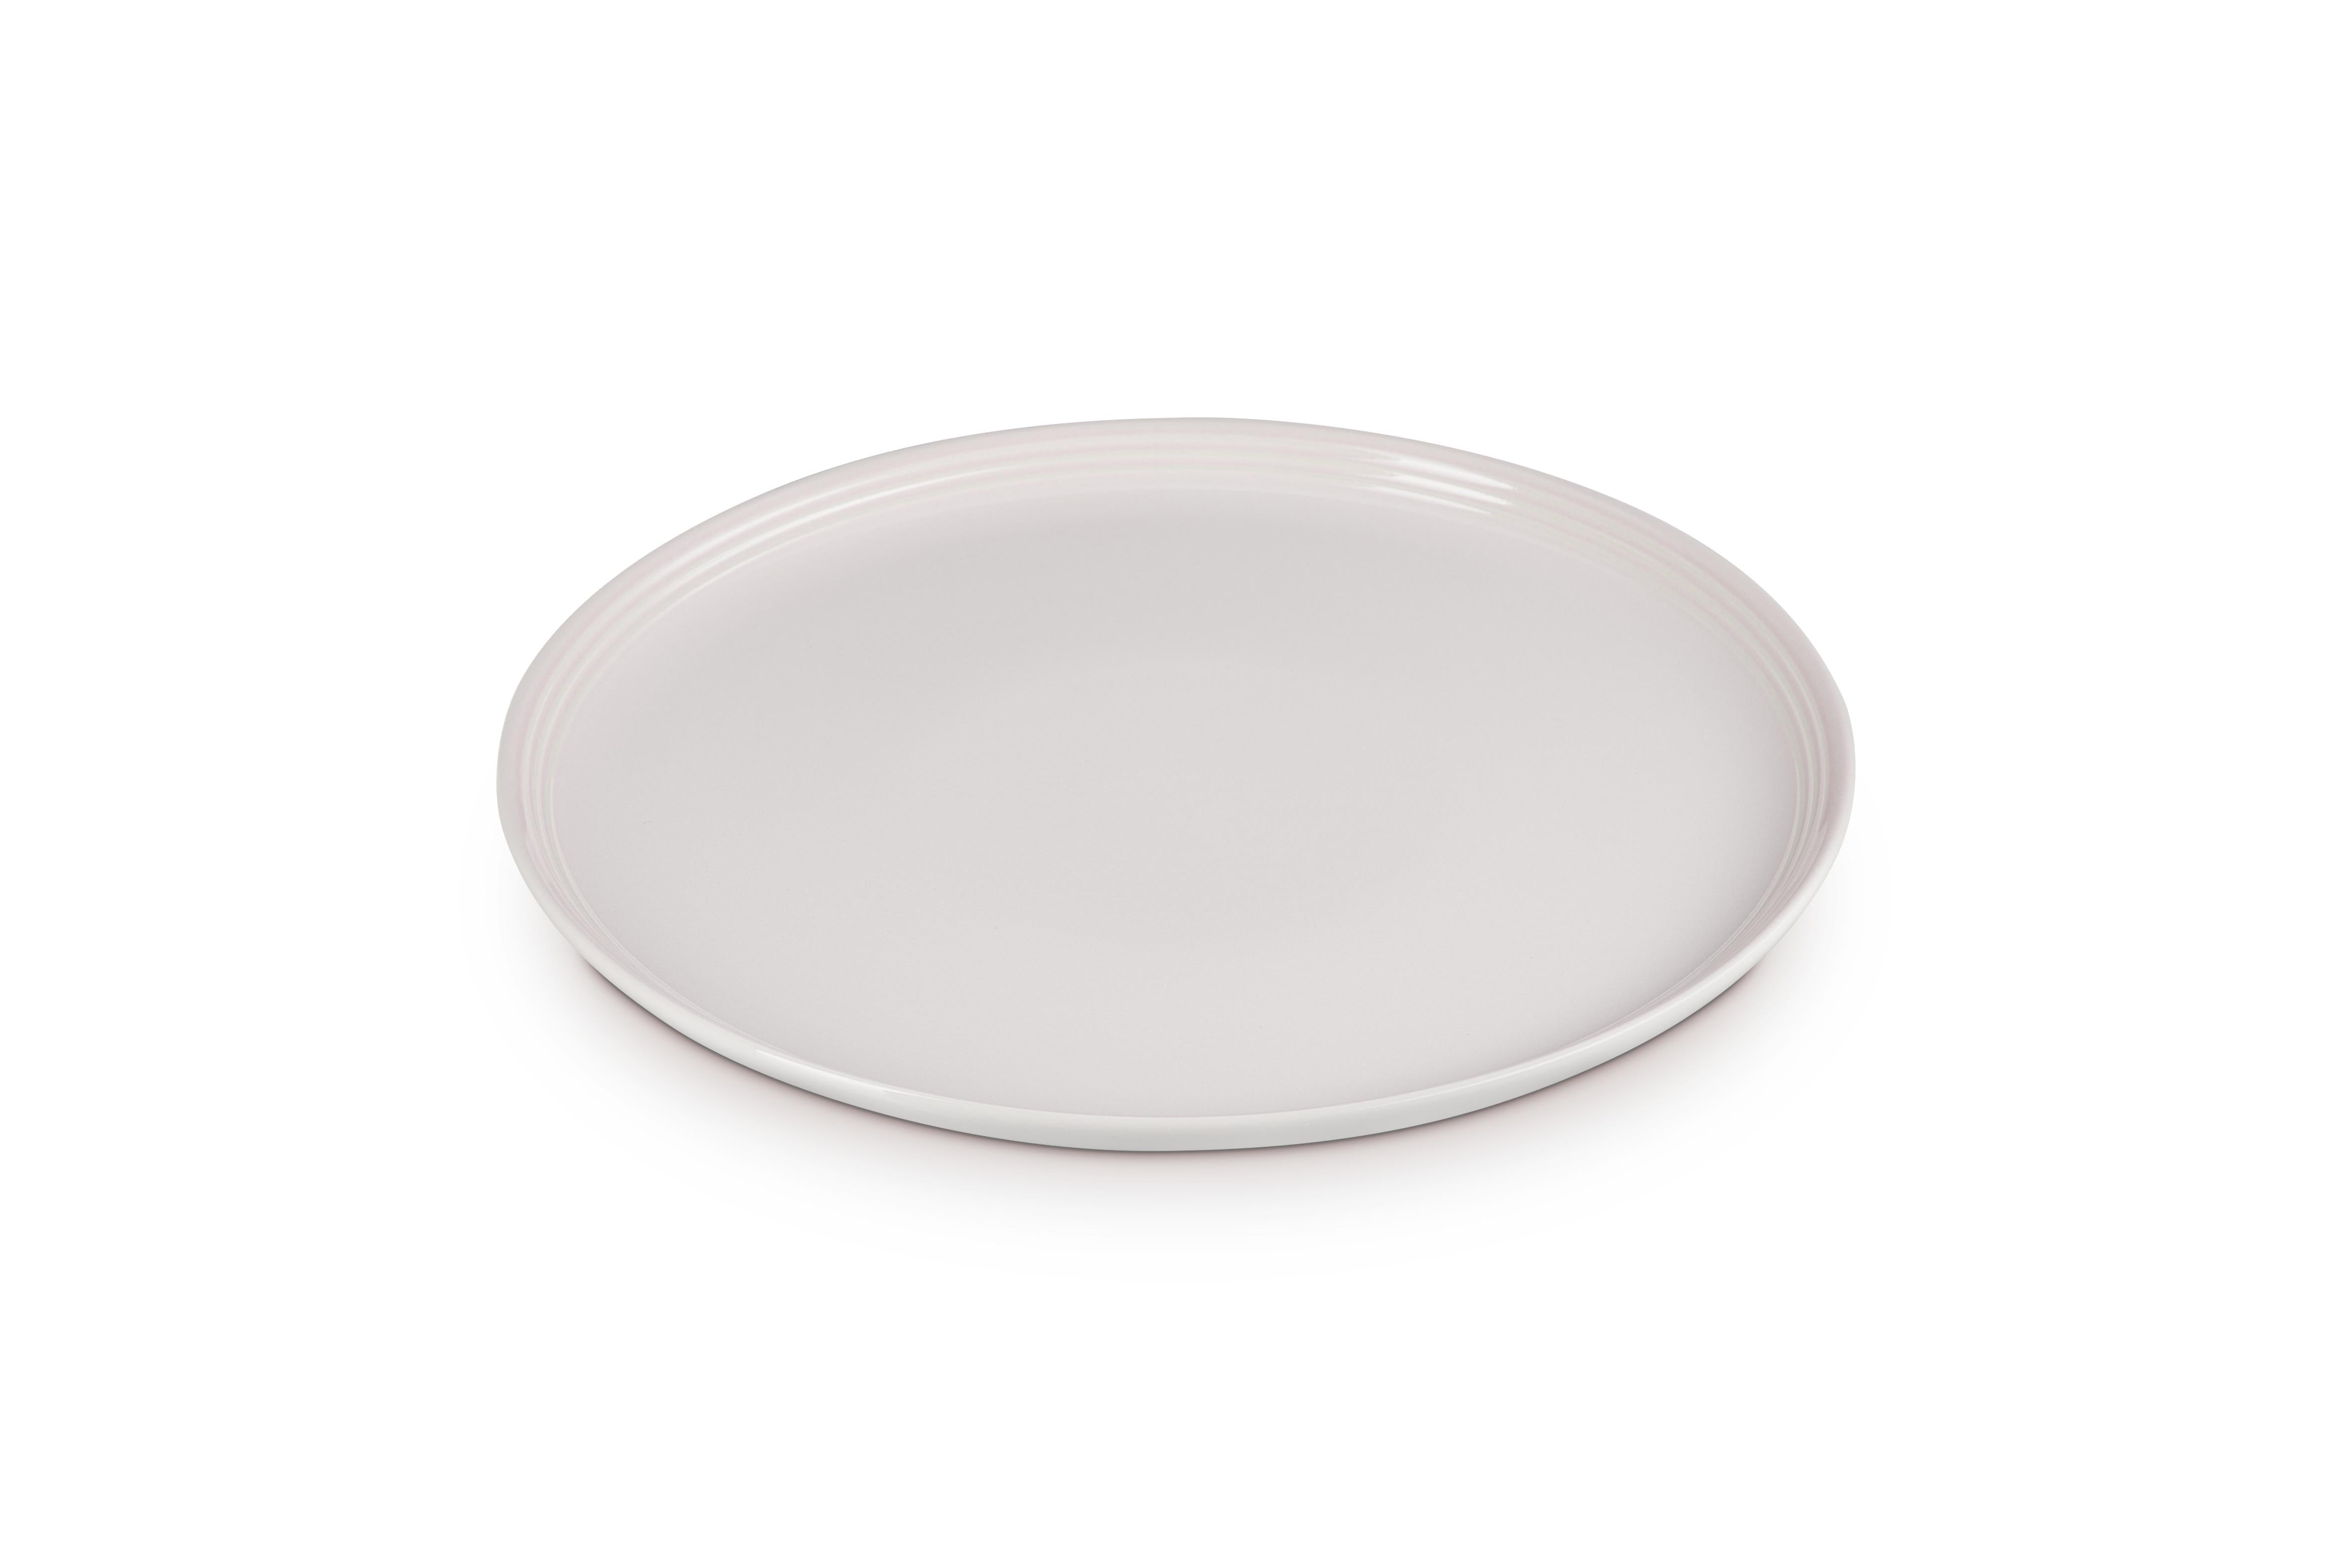 Le Creuset Coupe Dinner Plate, Shell Pink